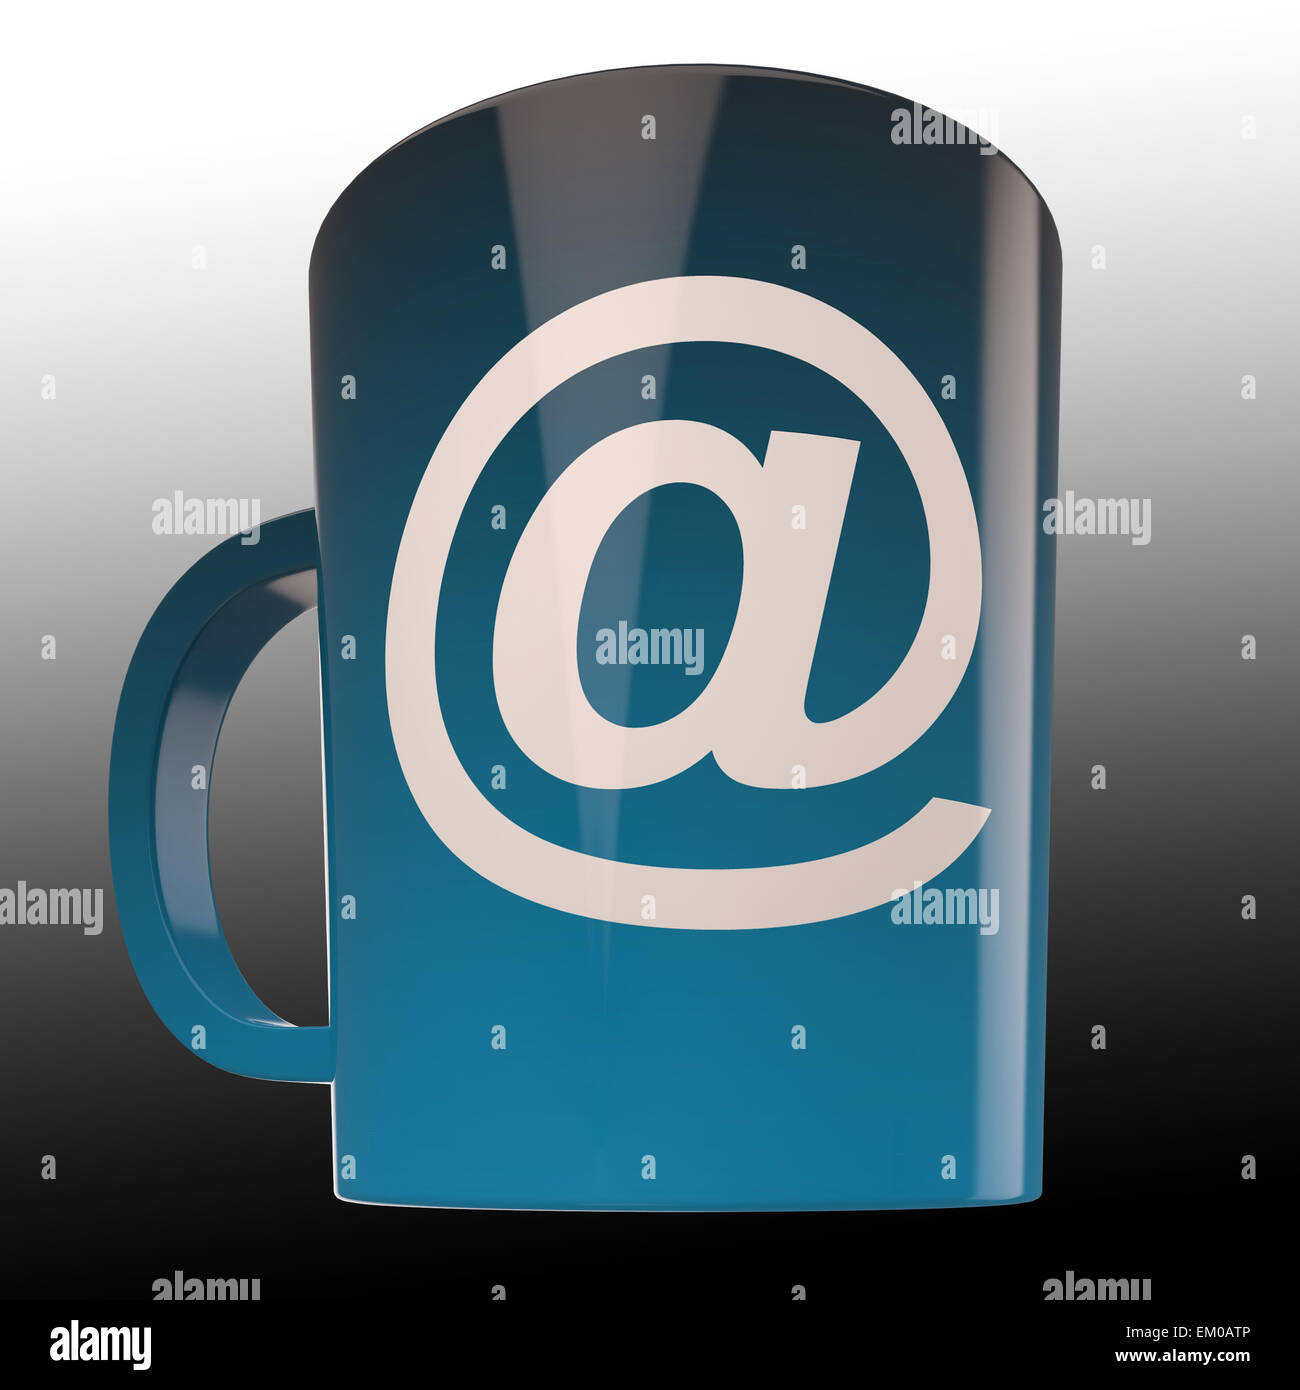 E-mail Coffee Cup Shows Internet Cafe Communication Stock Photo